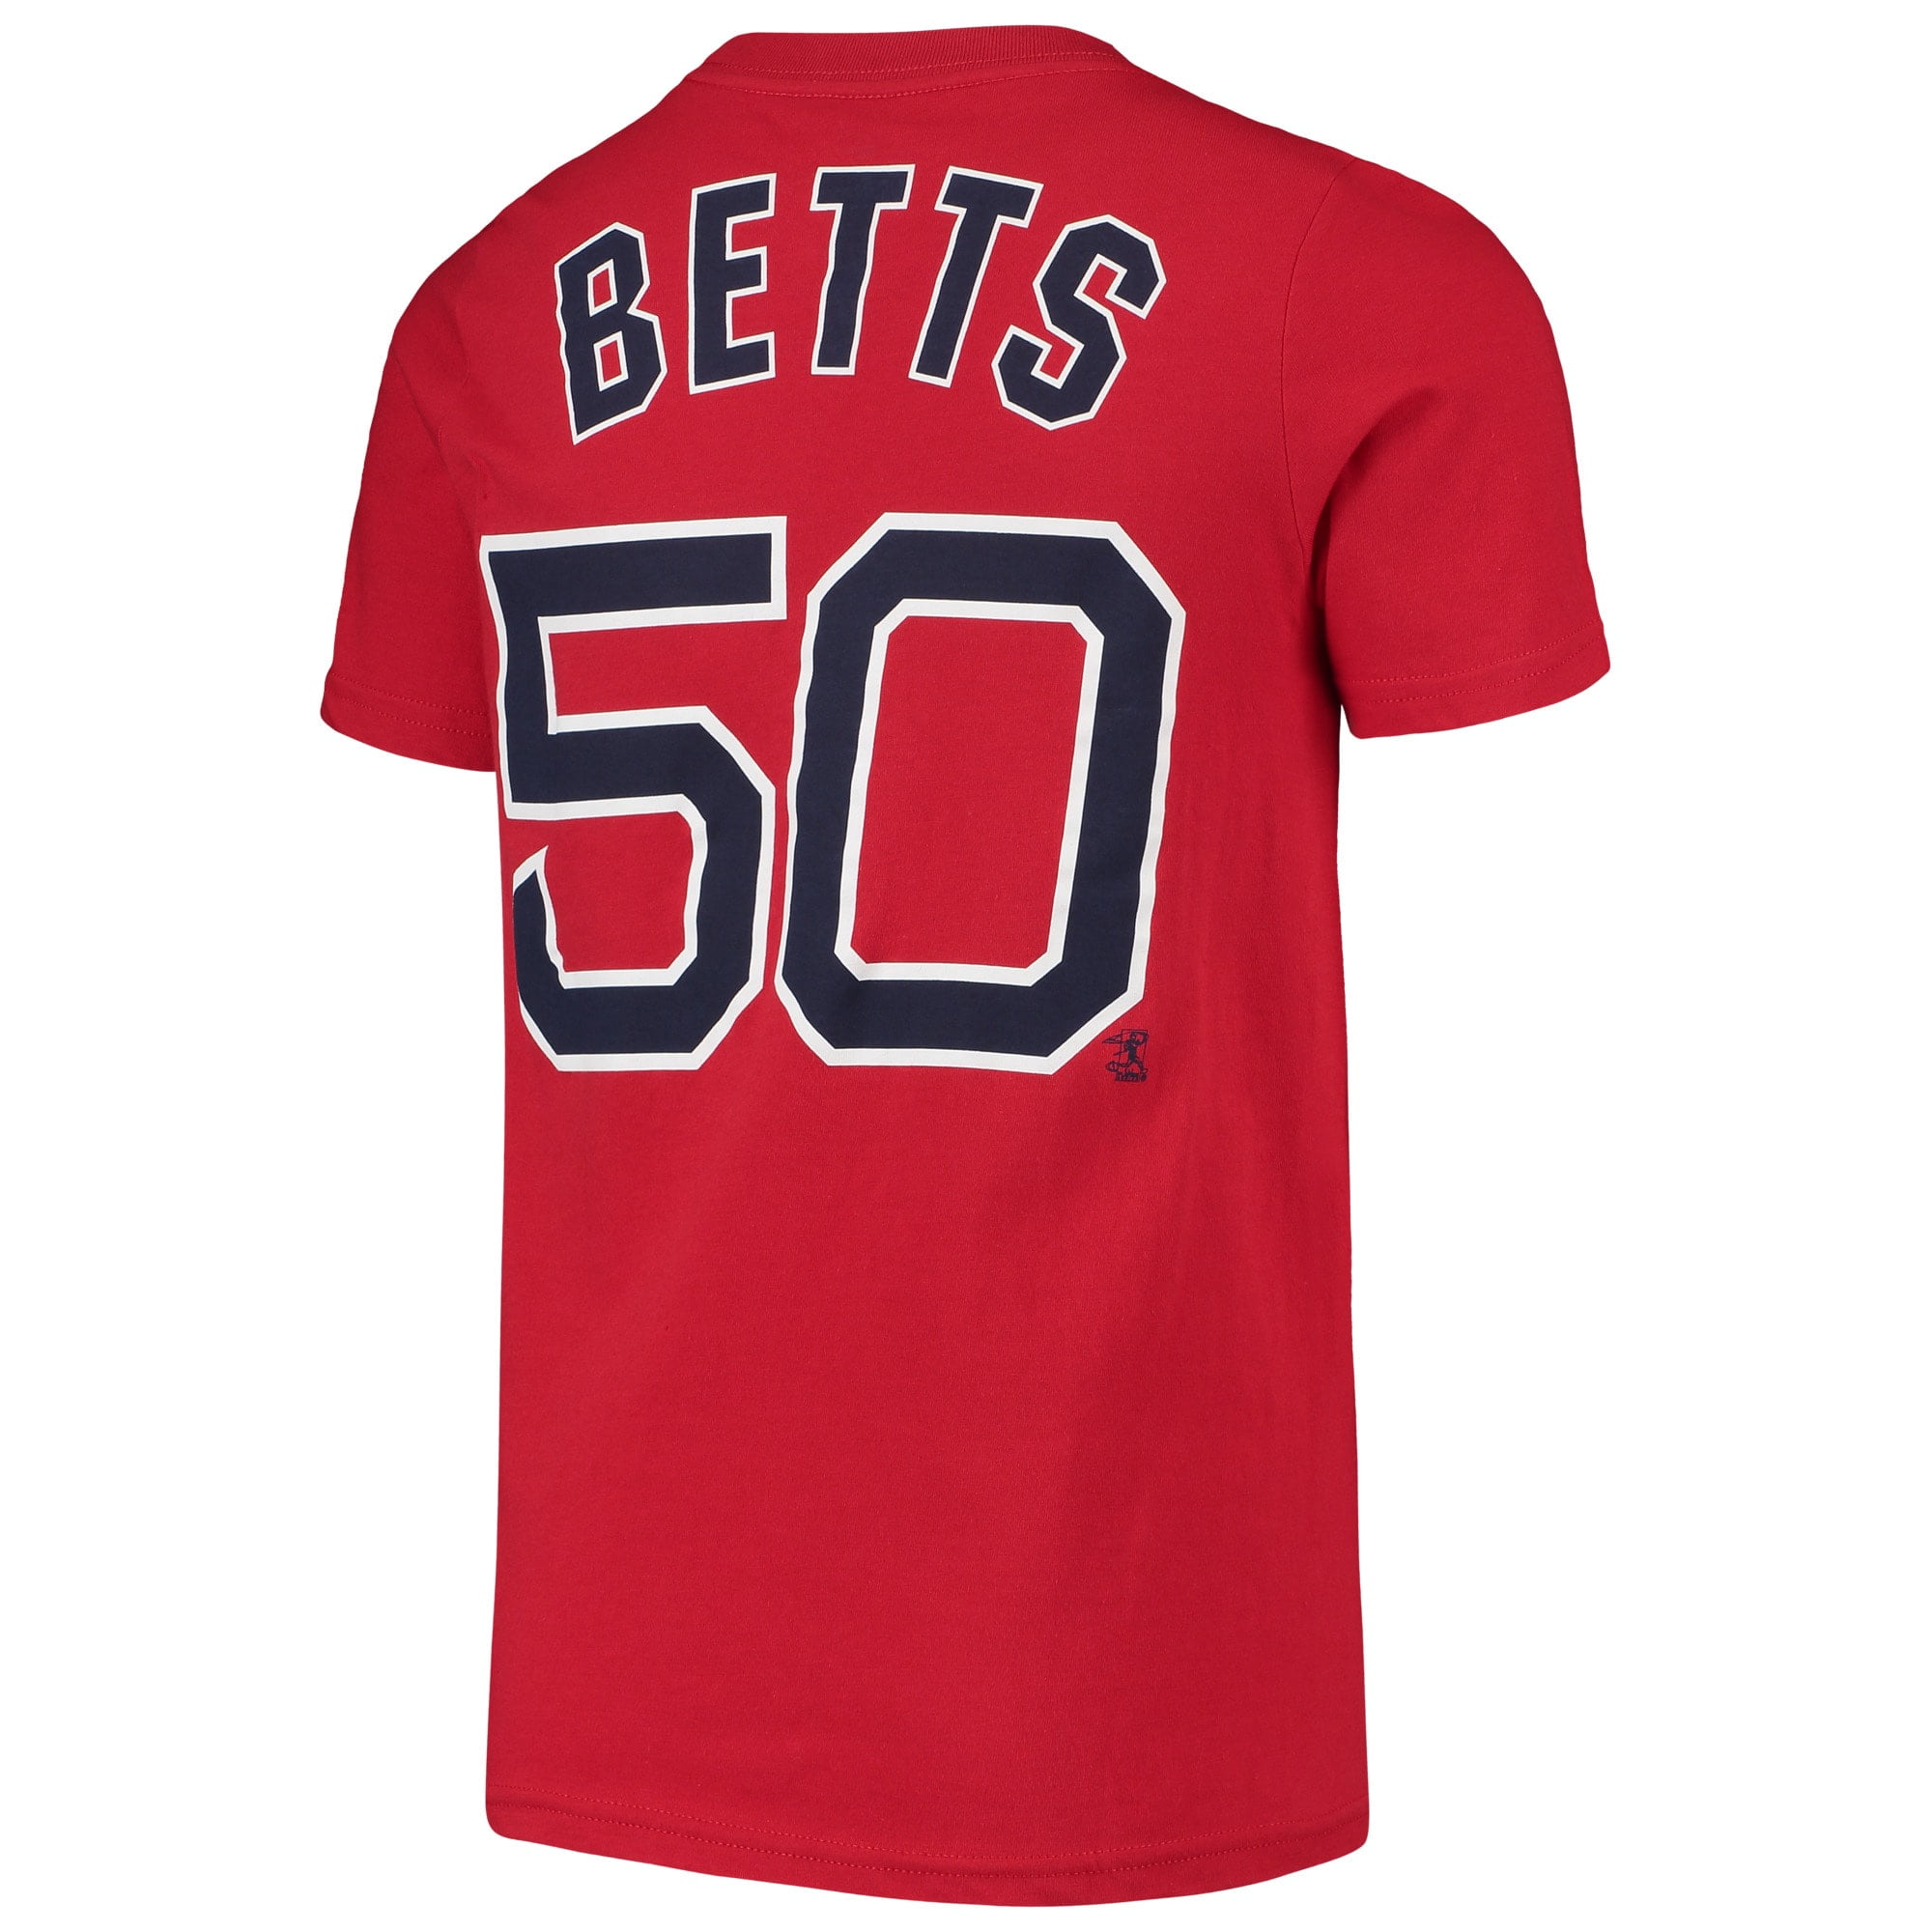 Mookie Betts Boston Red Sox Nike Youth 